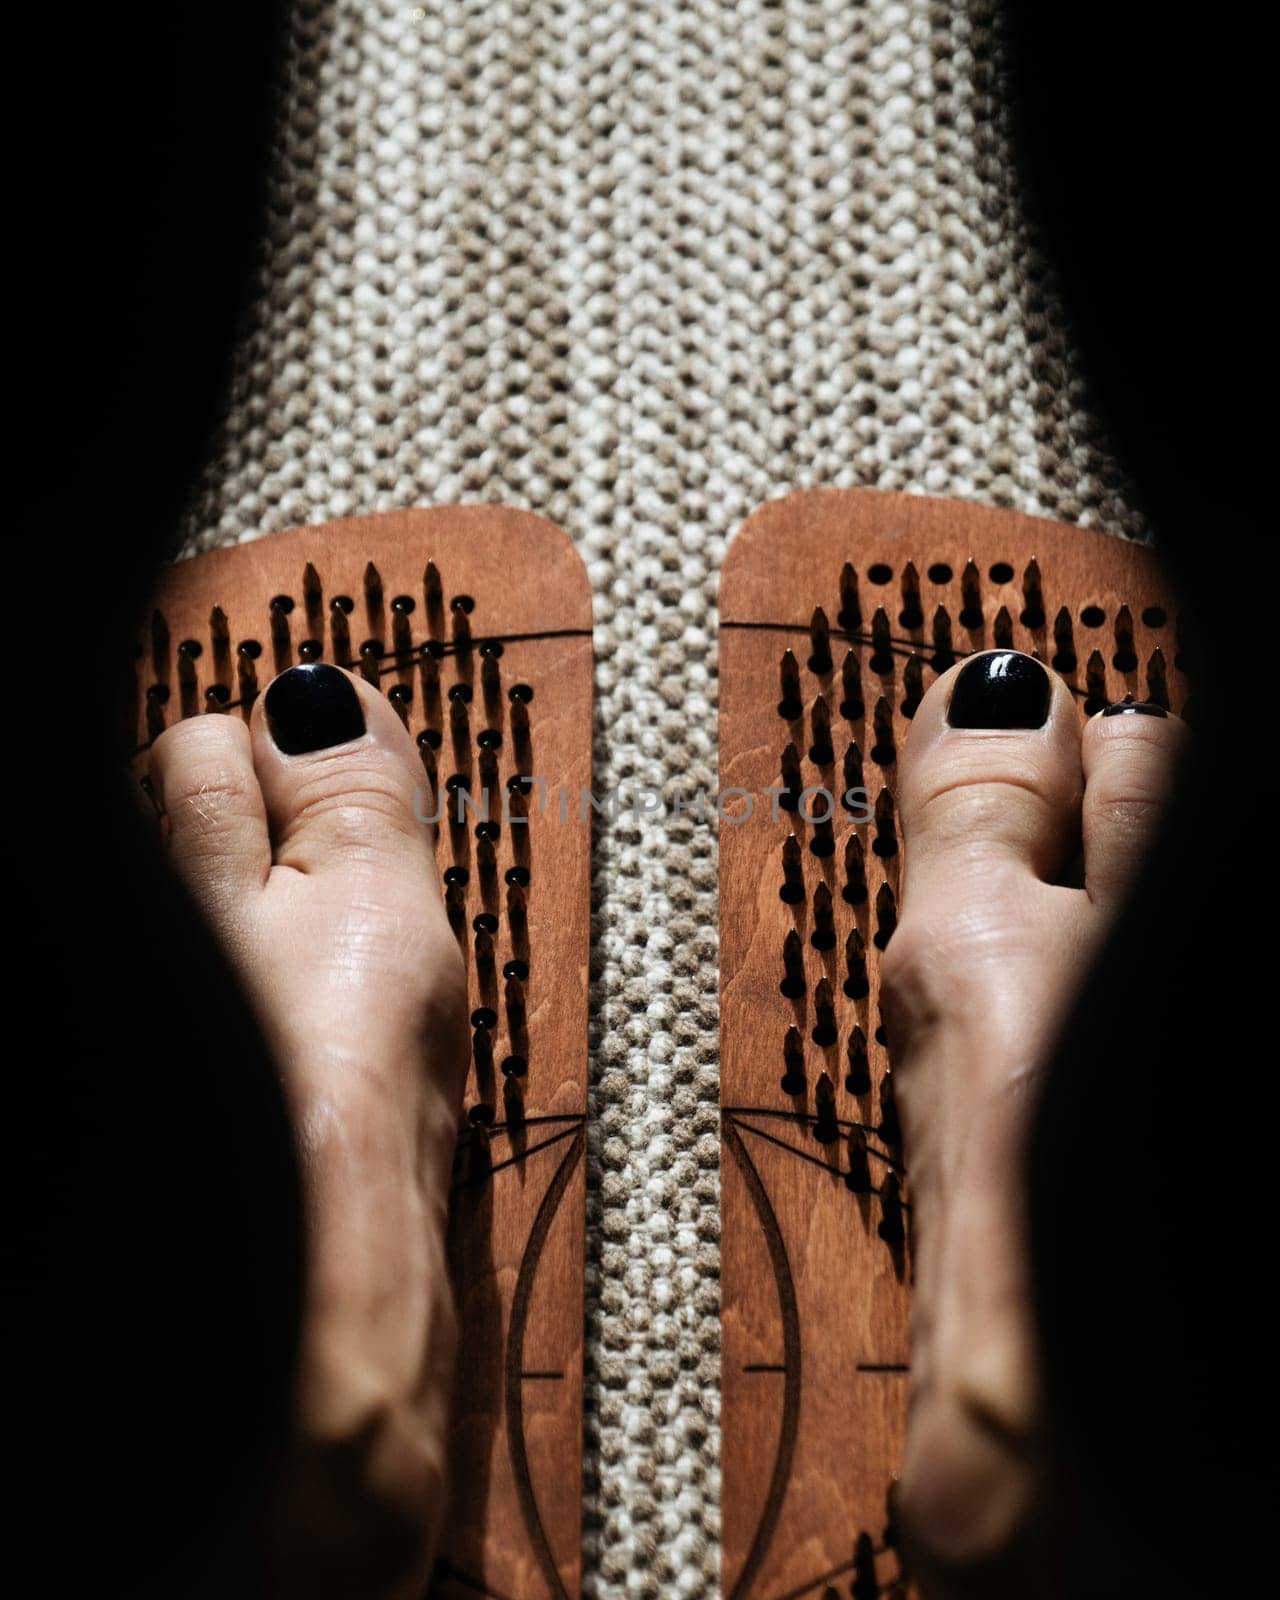 Shadow and light play over wooden acupressure boards with protruding pegs by apavlin